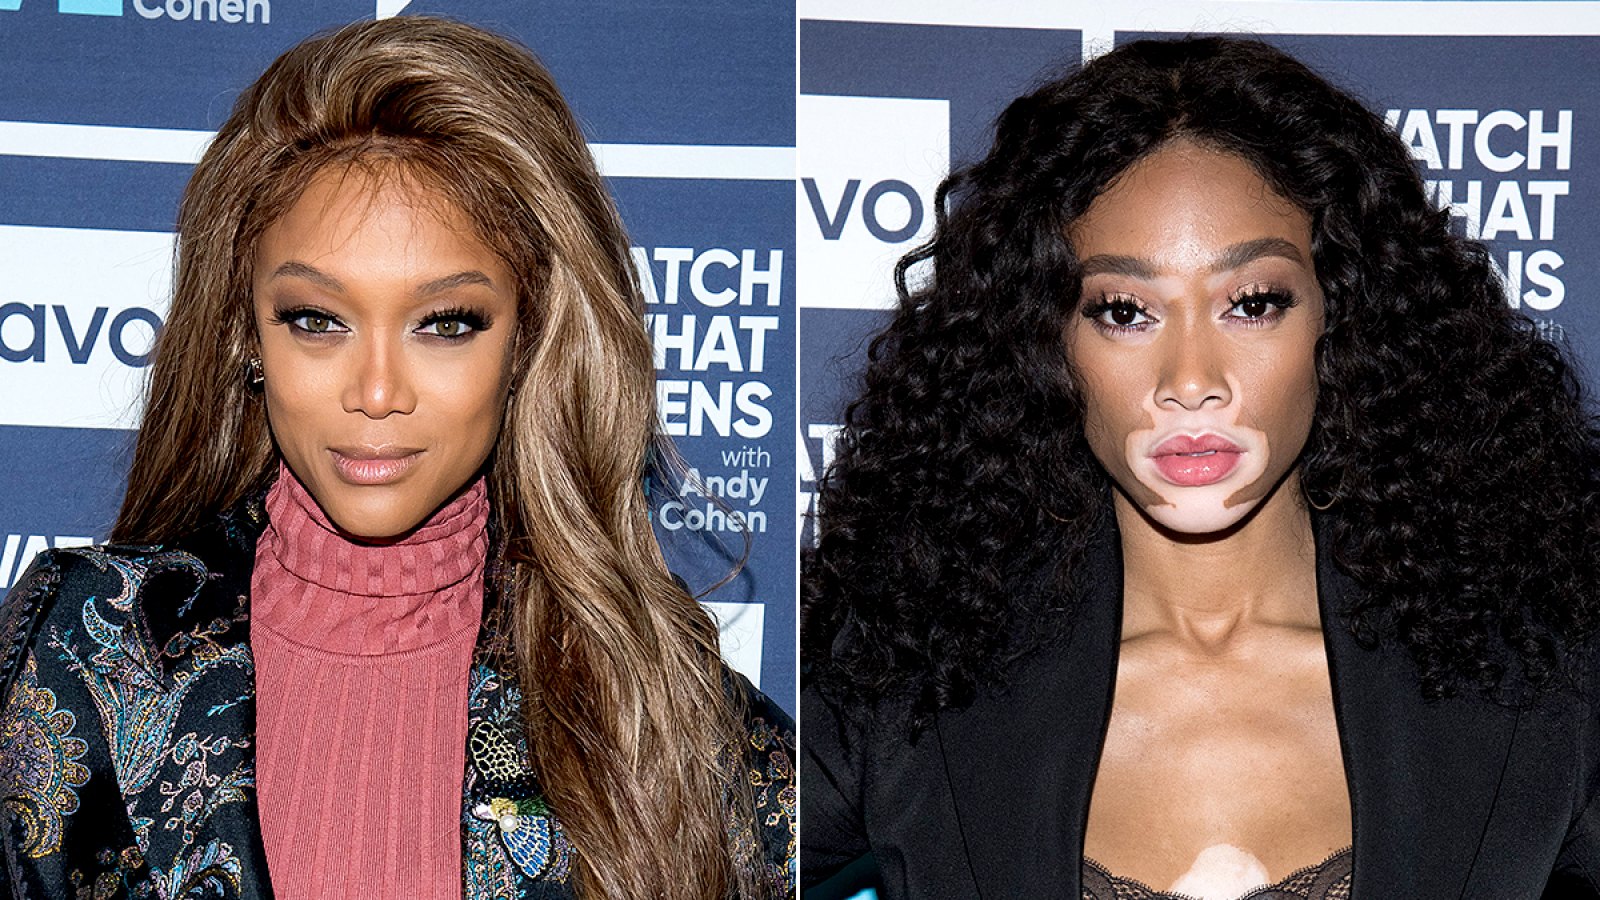 Tyra-Banks-Claps-Back-at-Winnie-Harlow